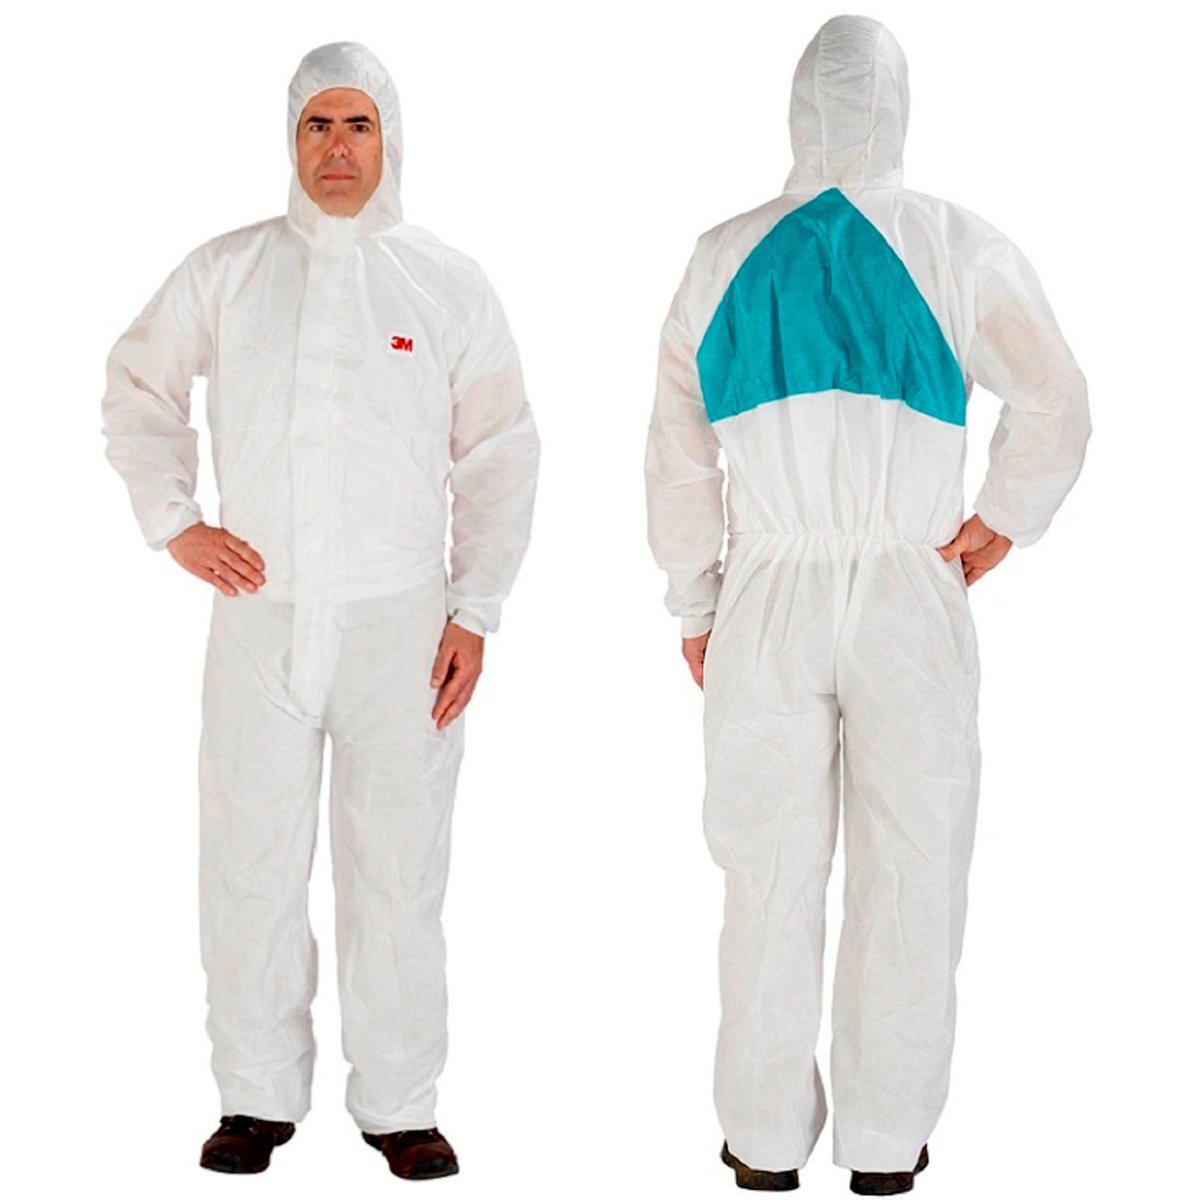 3M™ Disposable Protective Coverall 4520 L White/Green Type 5/6 (Availability restrictions apply.)